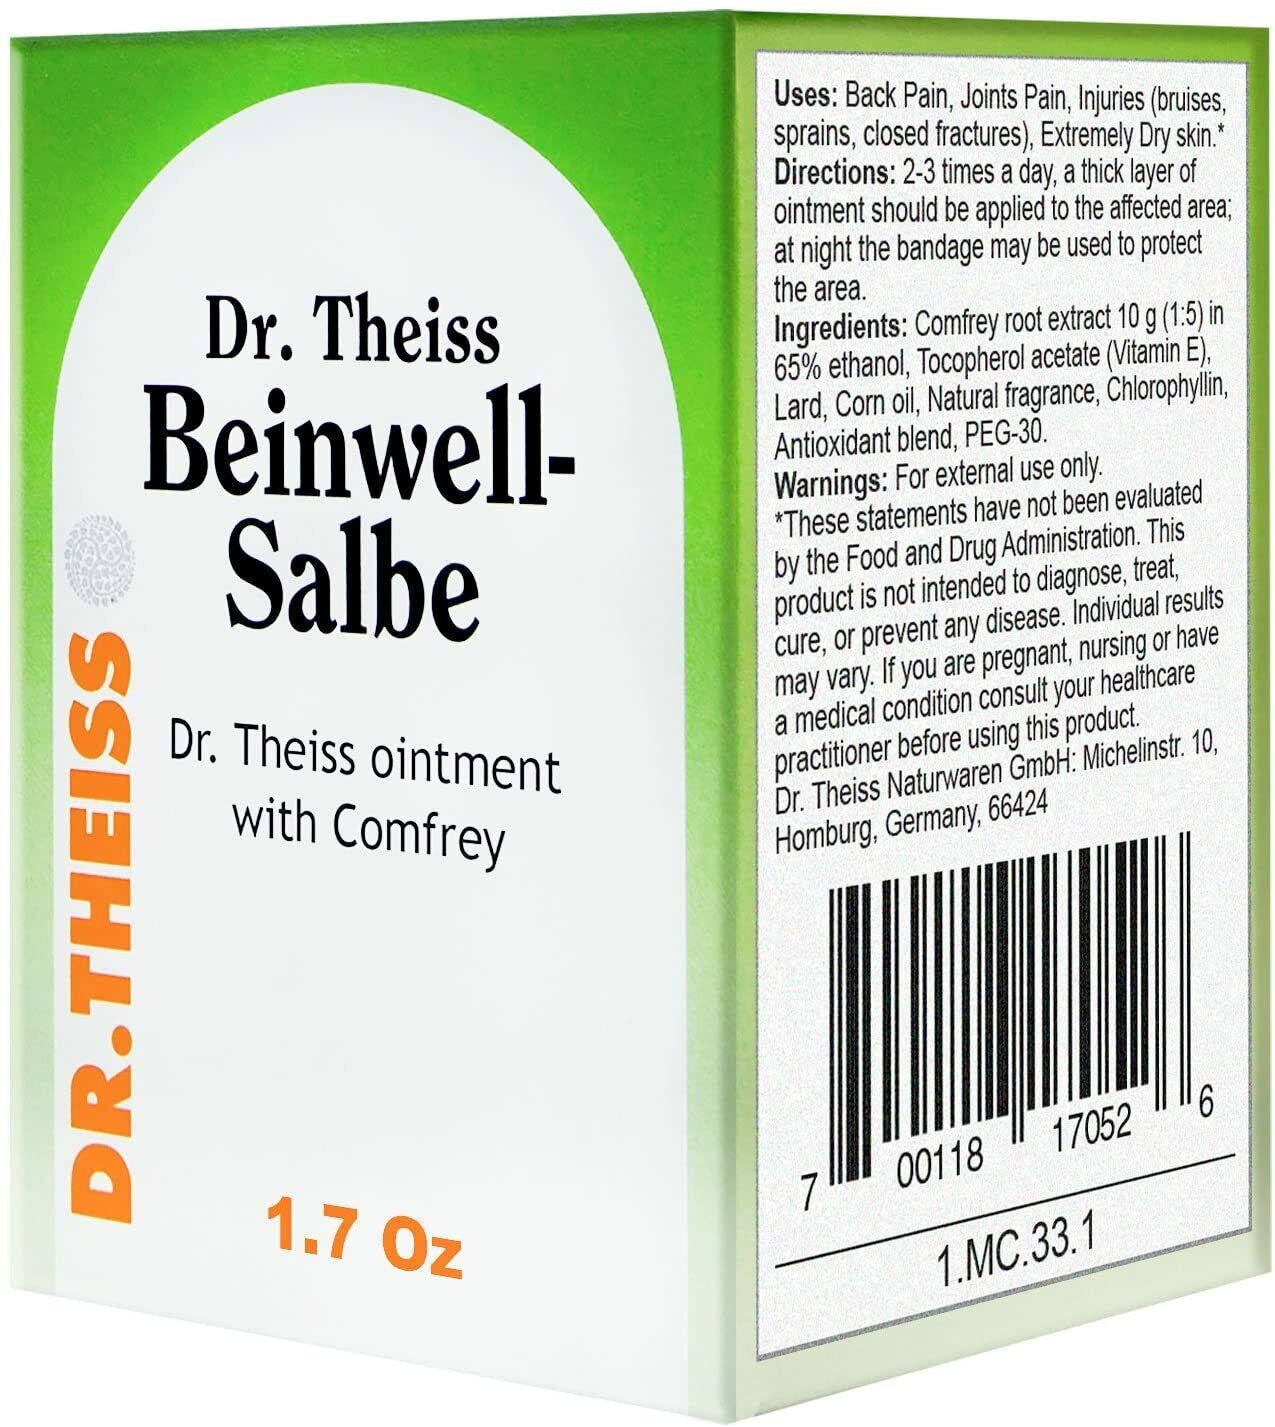 Over the counter Ointment Comfrey Beinwell-Salbe with Larkspur by Dr. Theiss 50g